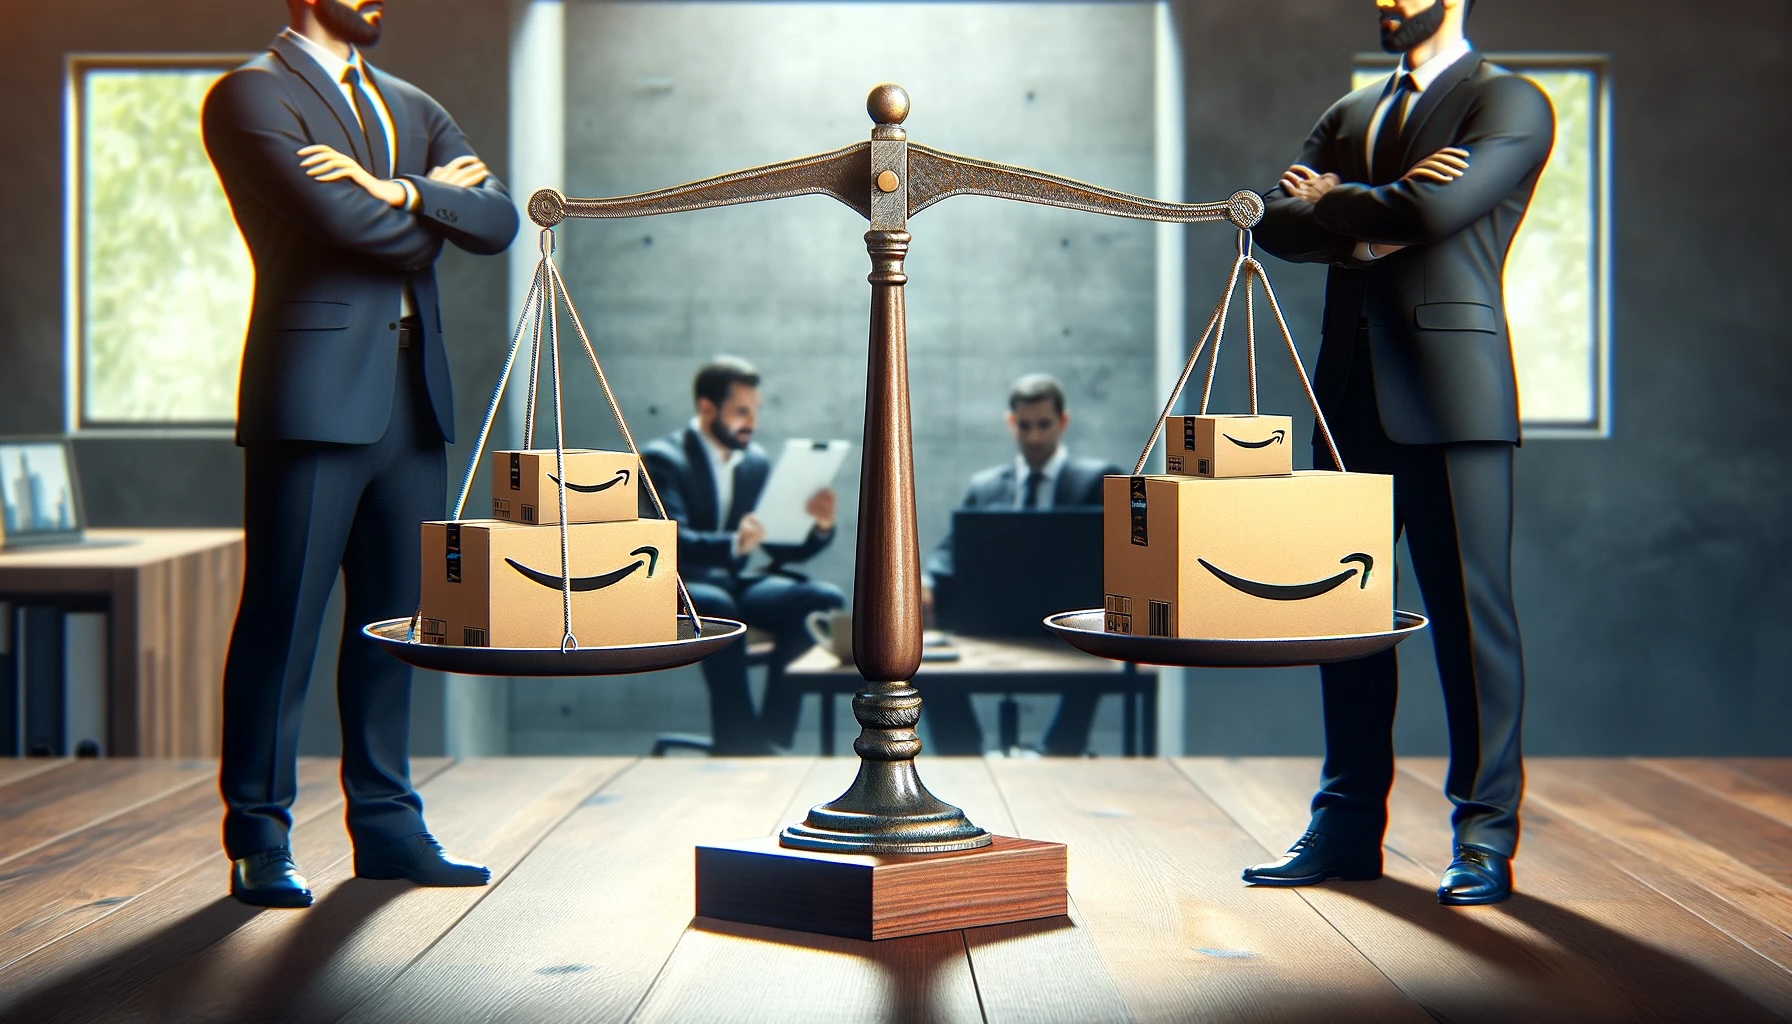 Two businessmen standing in business suits with arms crossed facing off behind an old fashioned scale with amazon boxes on the two platforms